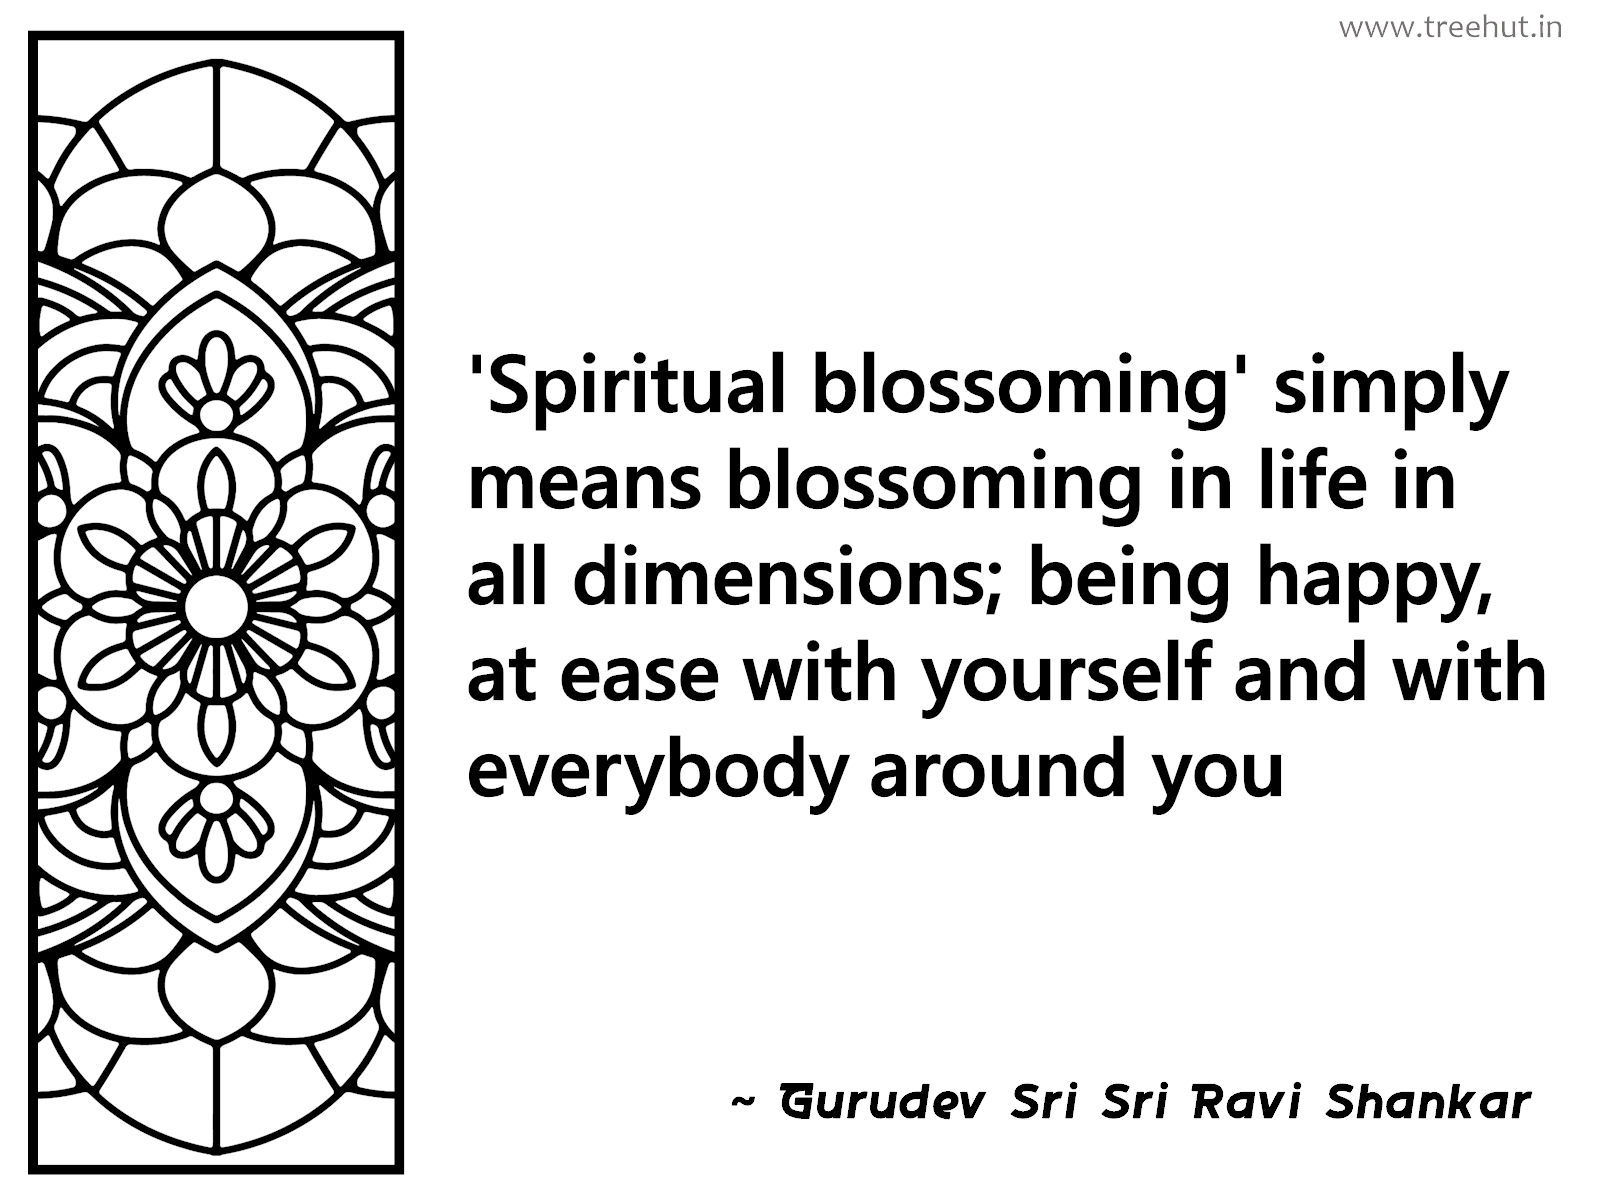 'Spiritual blossoming' simply means blossoming in life in all dimensions; being happy, at ease with yourself and with everybody around you Inspirational Quote by Gurudev Sri Sri Ravi Shankar, coloring pages